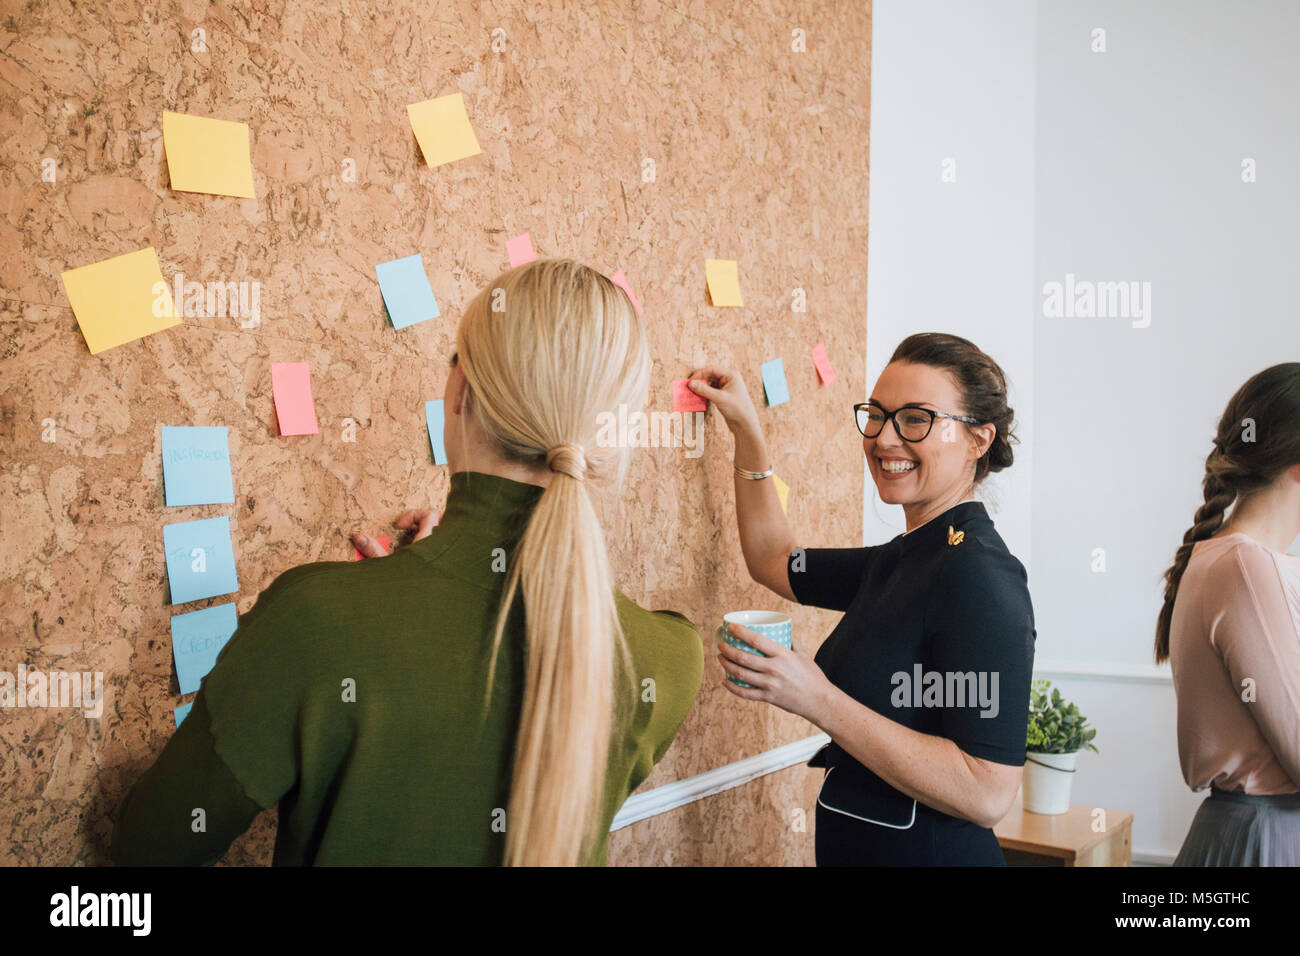 Two women are at work in an office. They are standing at a cork board and are having a discussion as they pin things up. Stock Photo